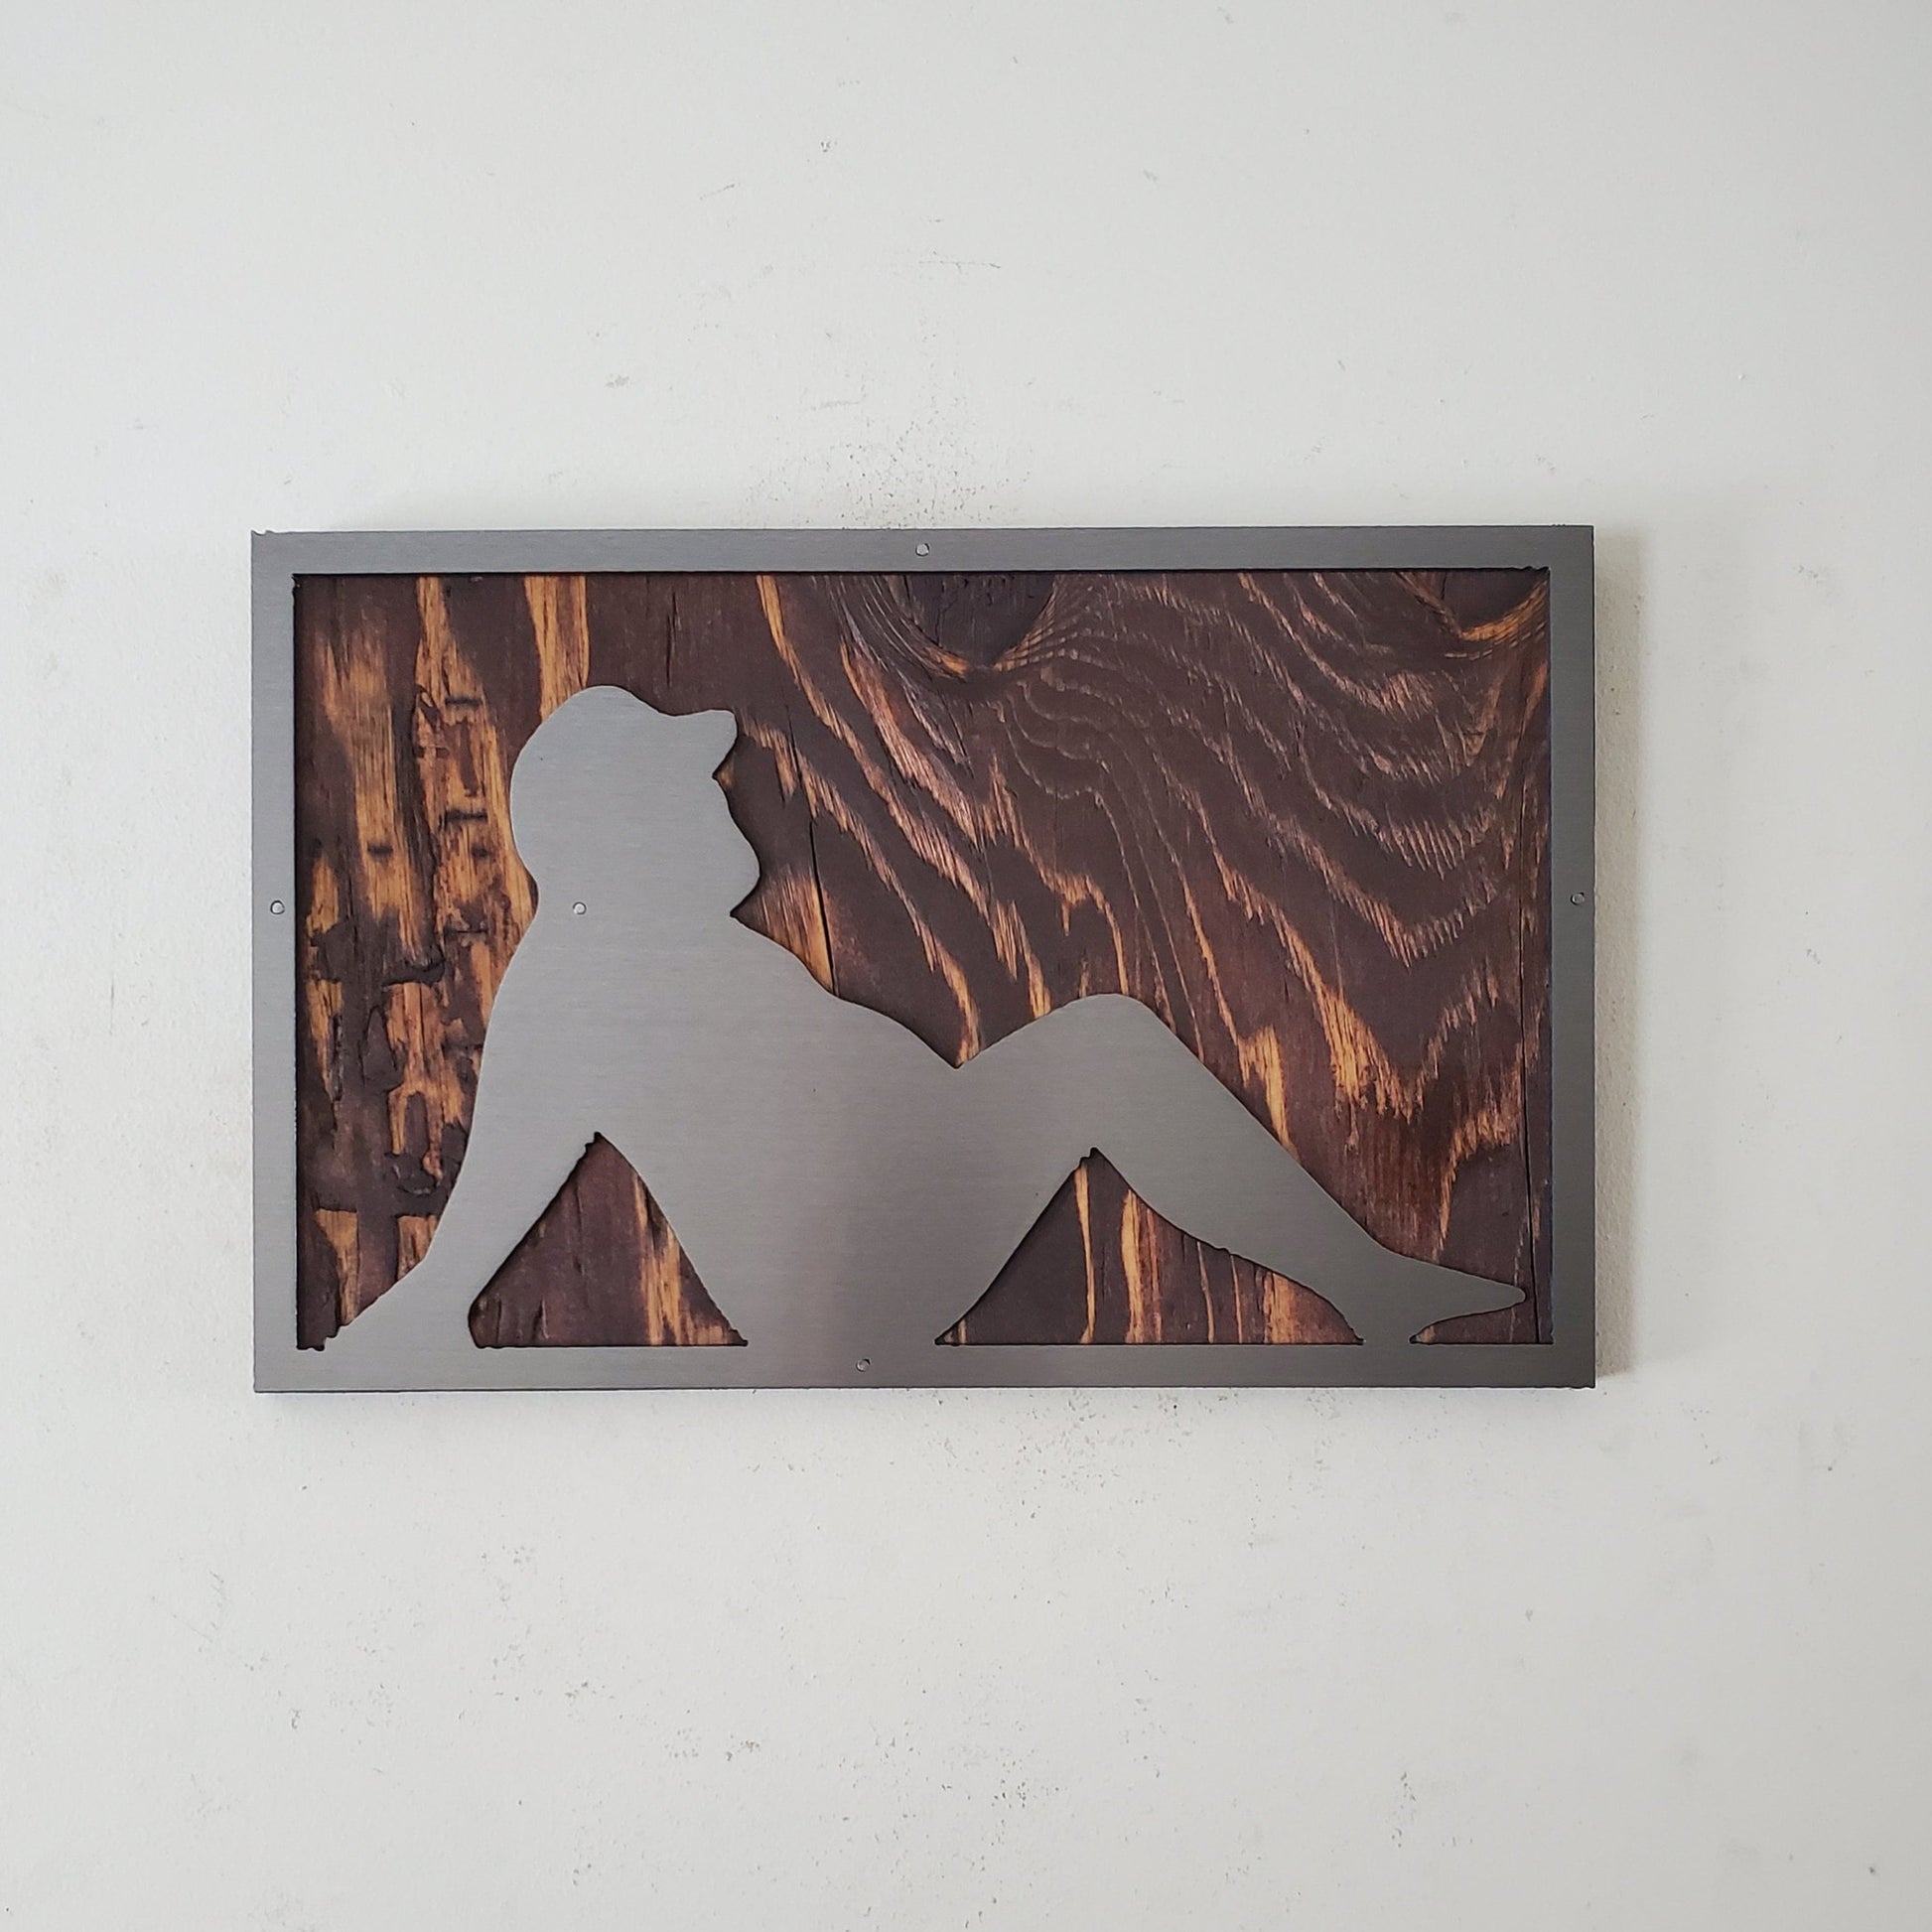 Metal cut-out sculpture of a Dad Bod physique, mounted on a rustic stained wood background, suitable for indoor display, easy to hang